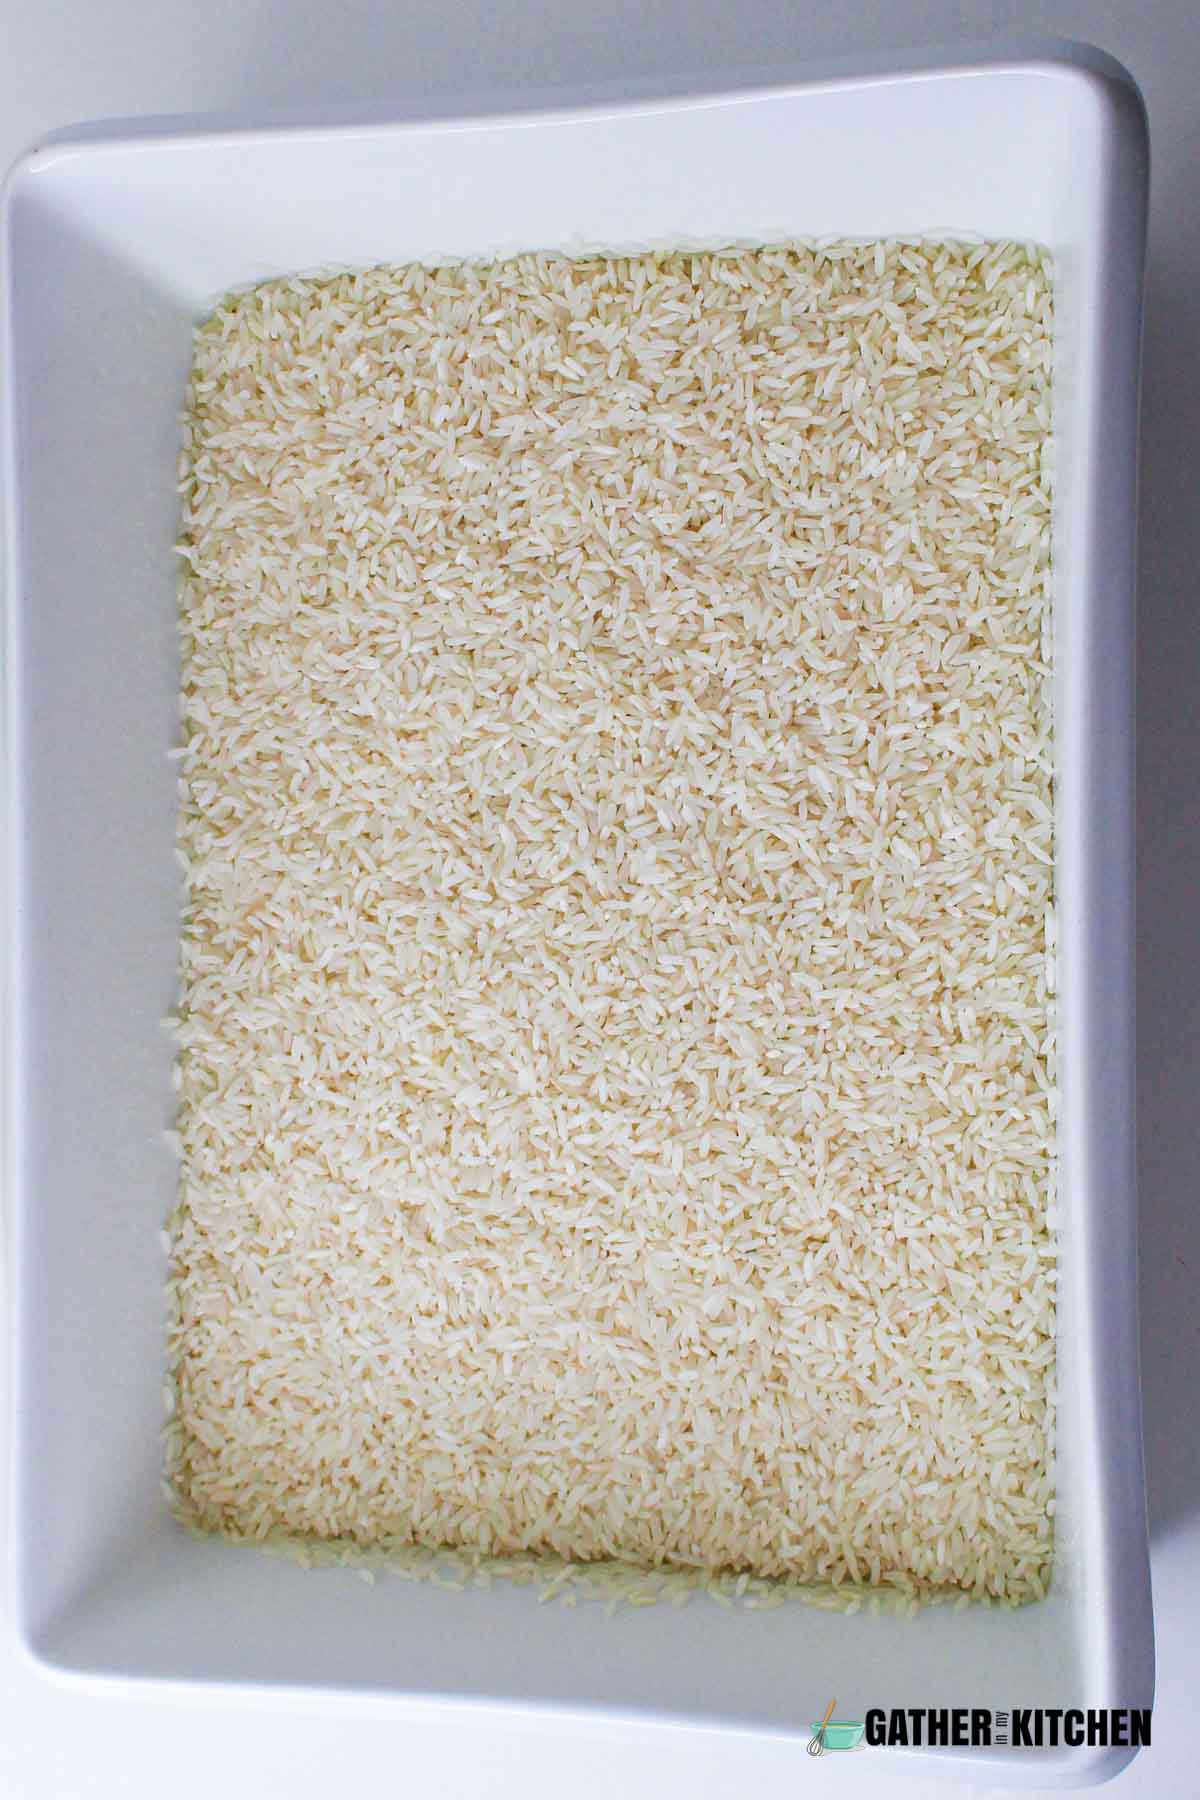 A tray filled with rice.